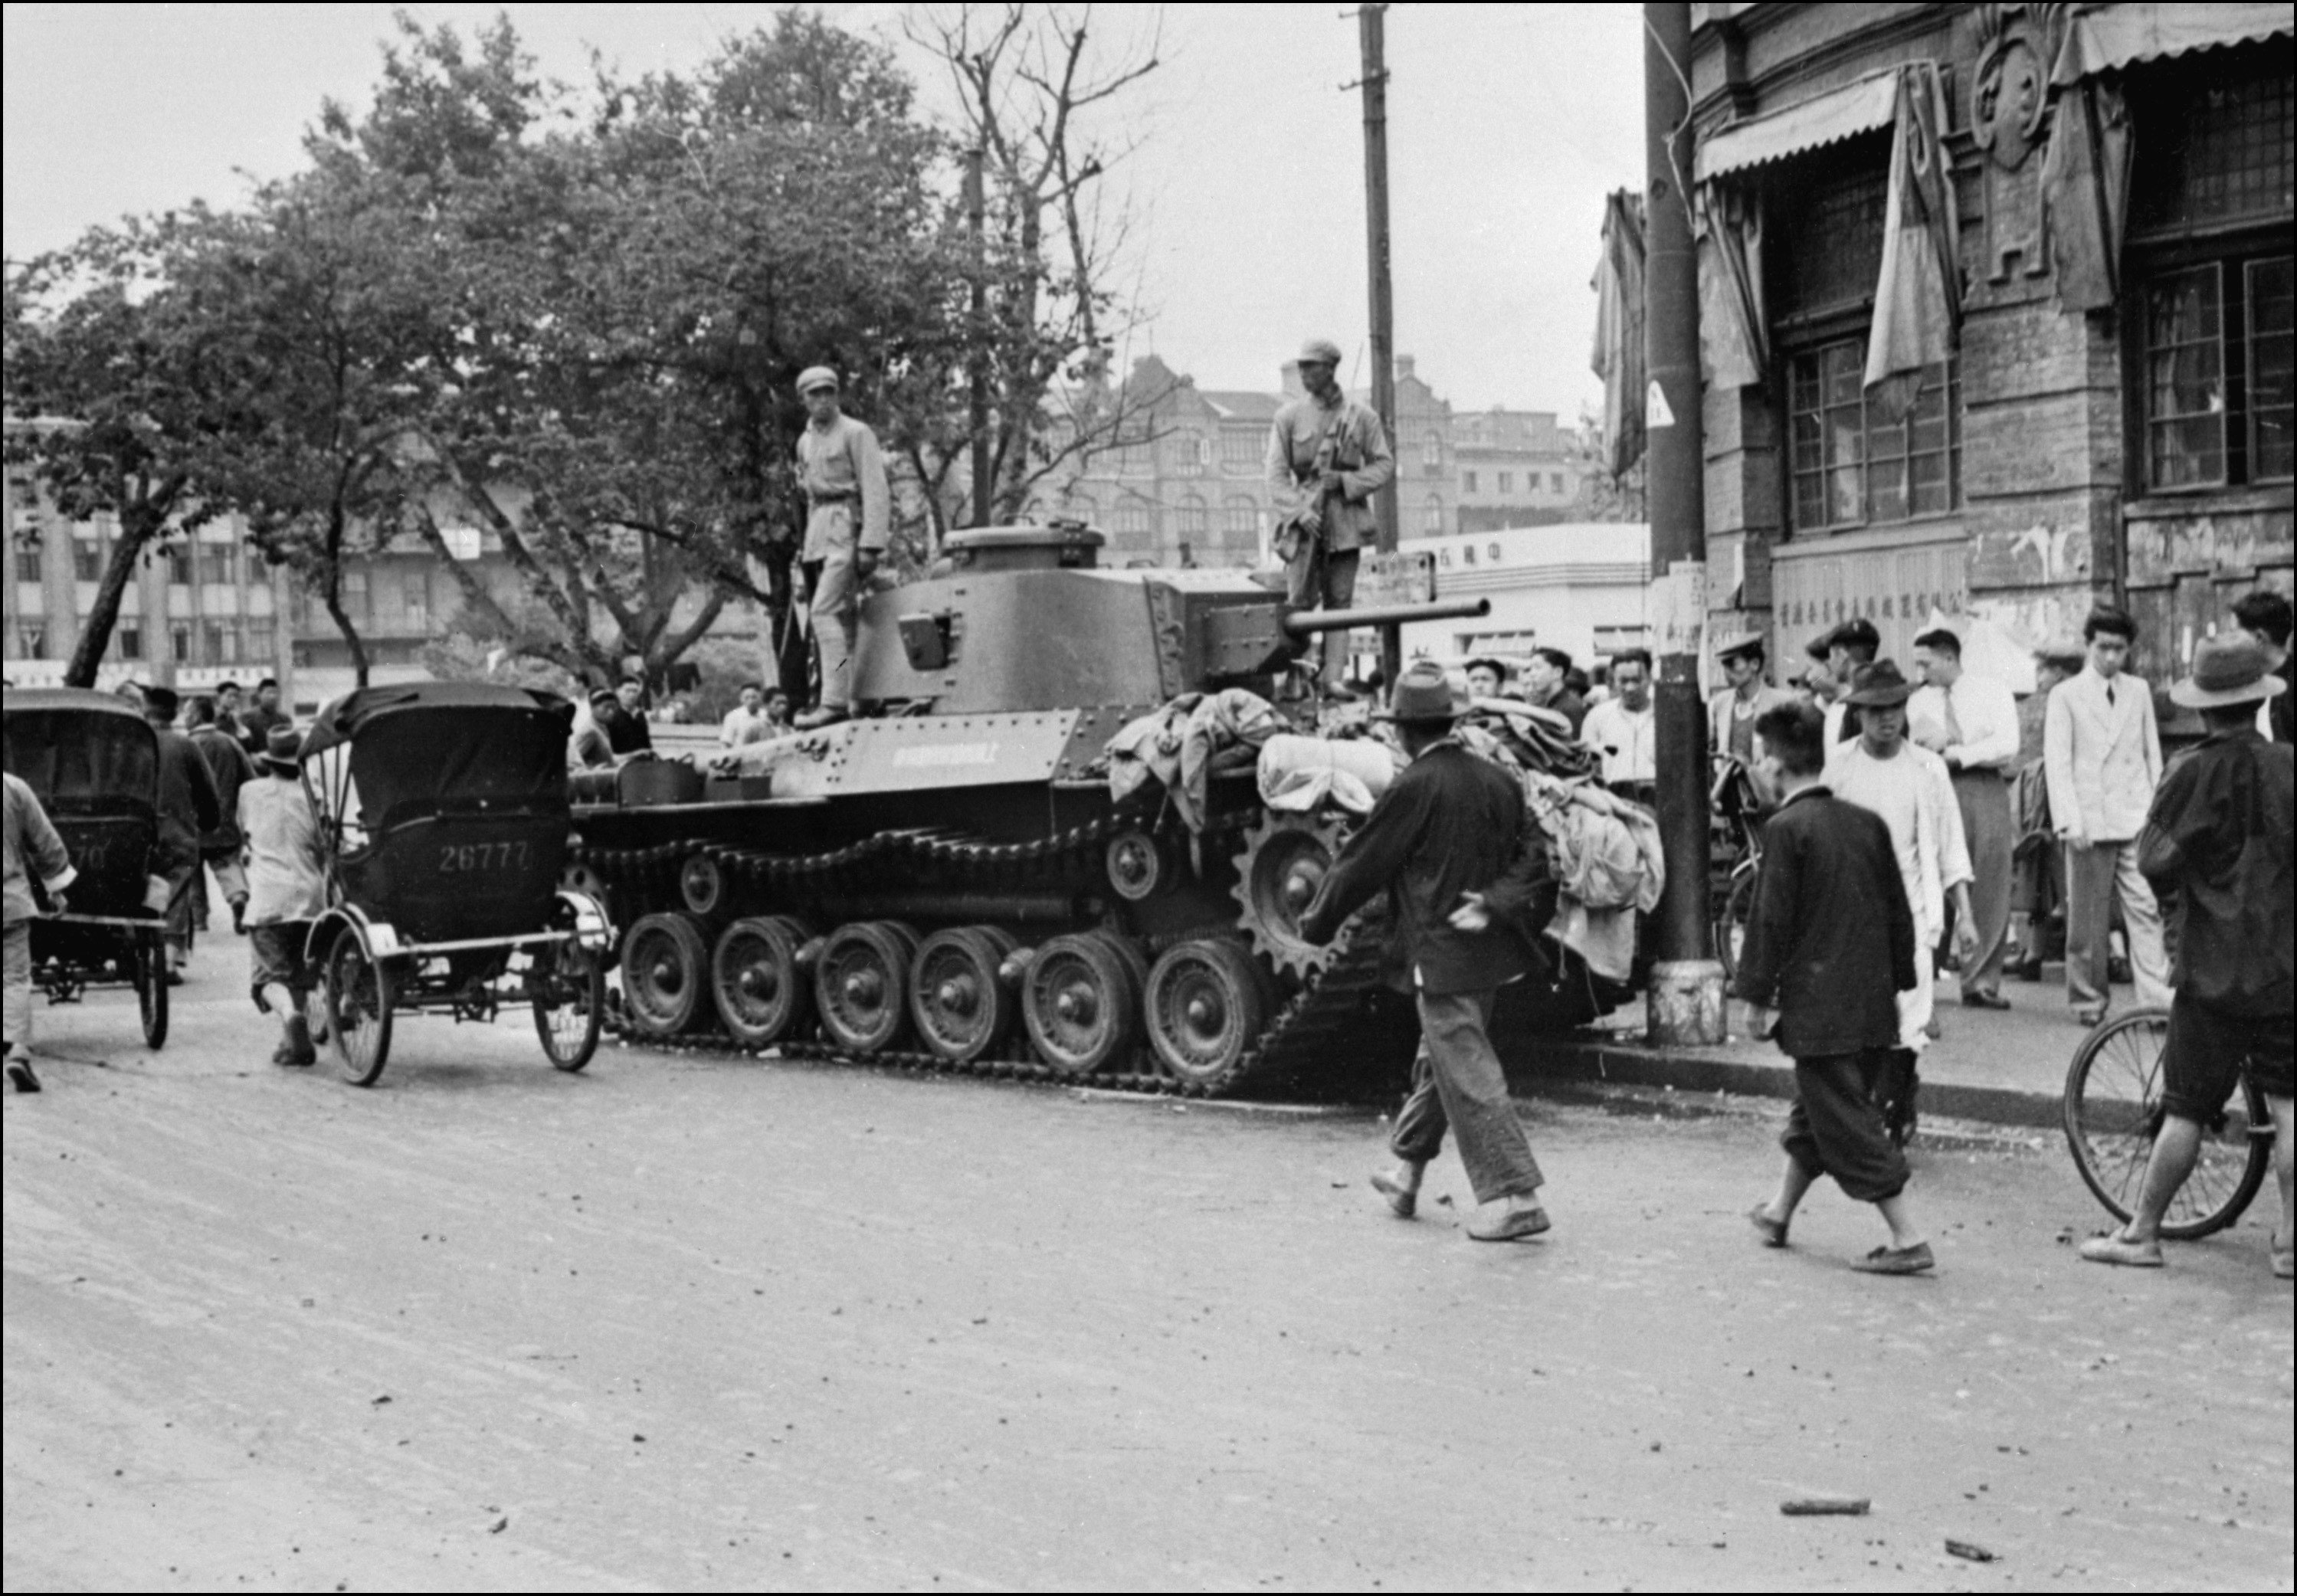 A communist tank in Shanghai on June 24, 1949 after Mao Zedong’s troops invaded the Chinese metropolis. Photo: AFP